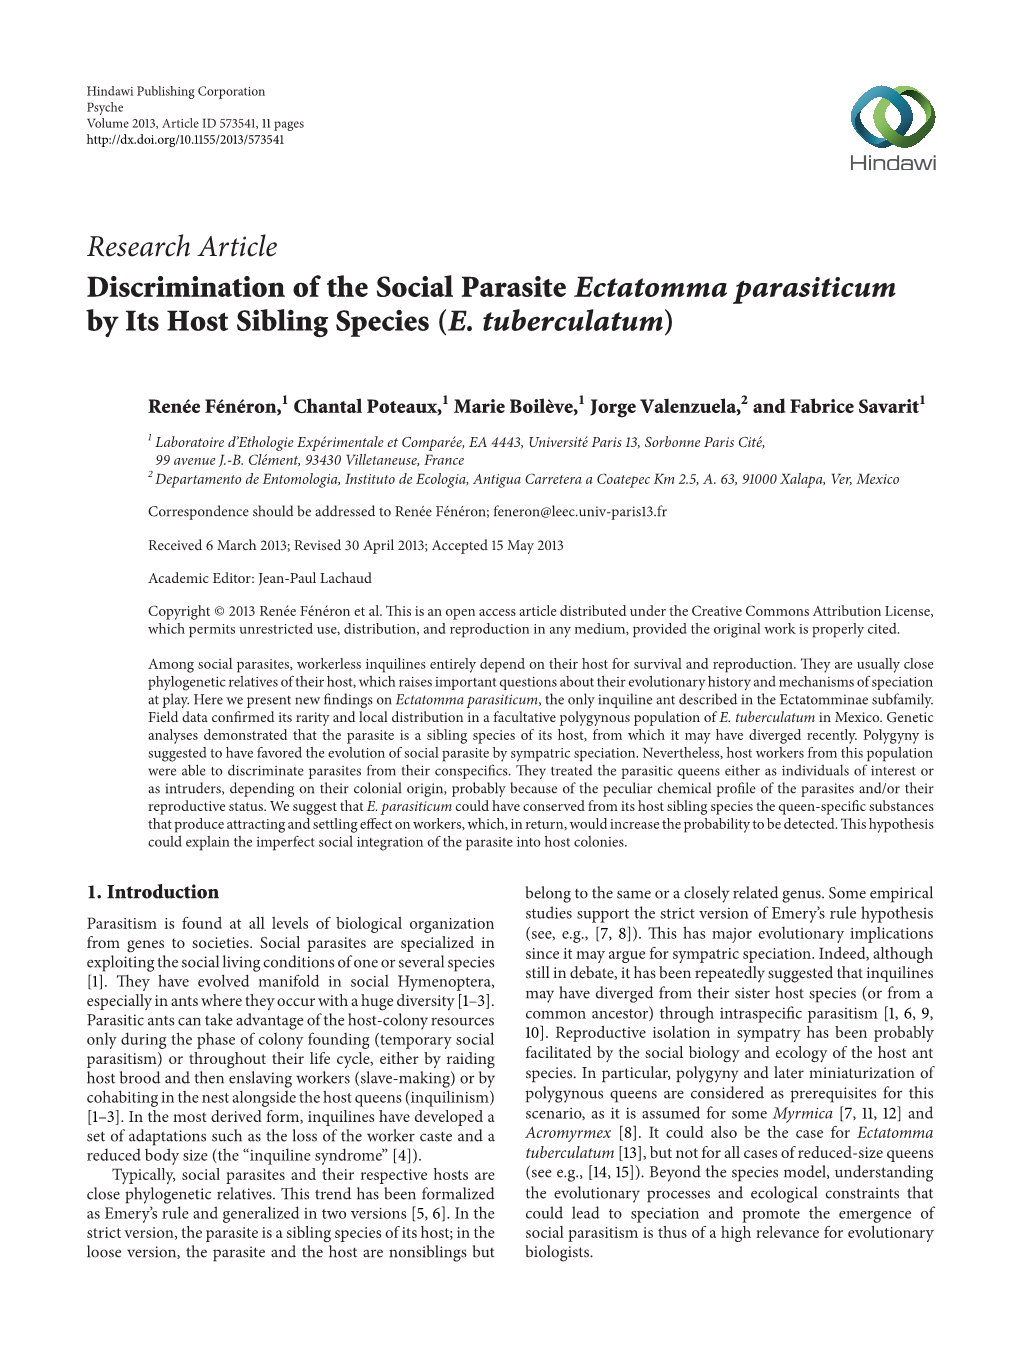 Research Article Discrimination of the Social Parasite Ectatomma Parasiticum by Its Host Sibling Species (E